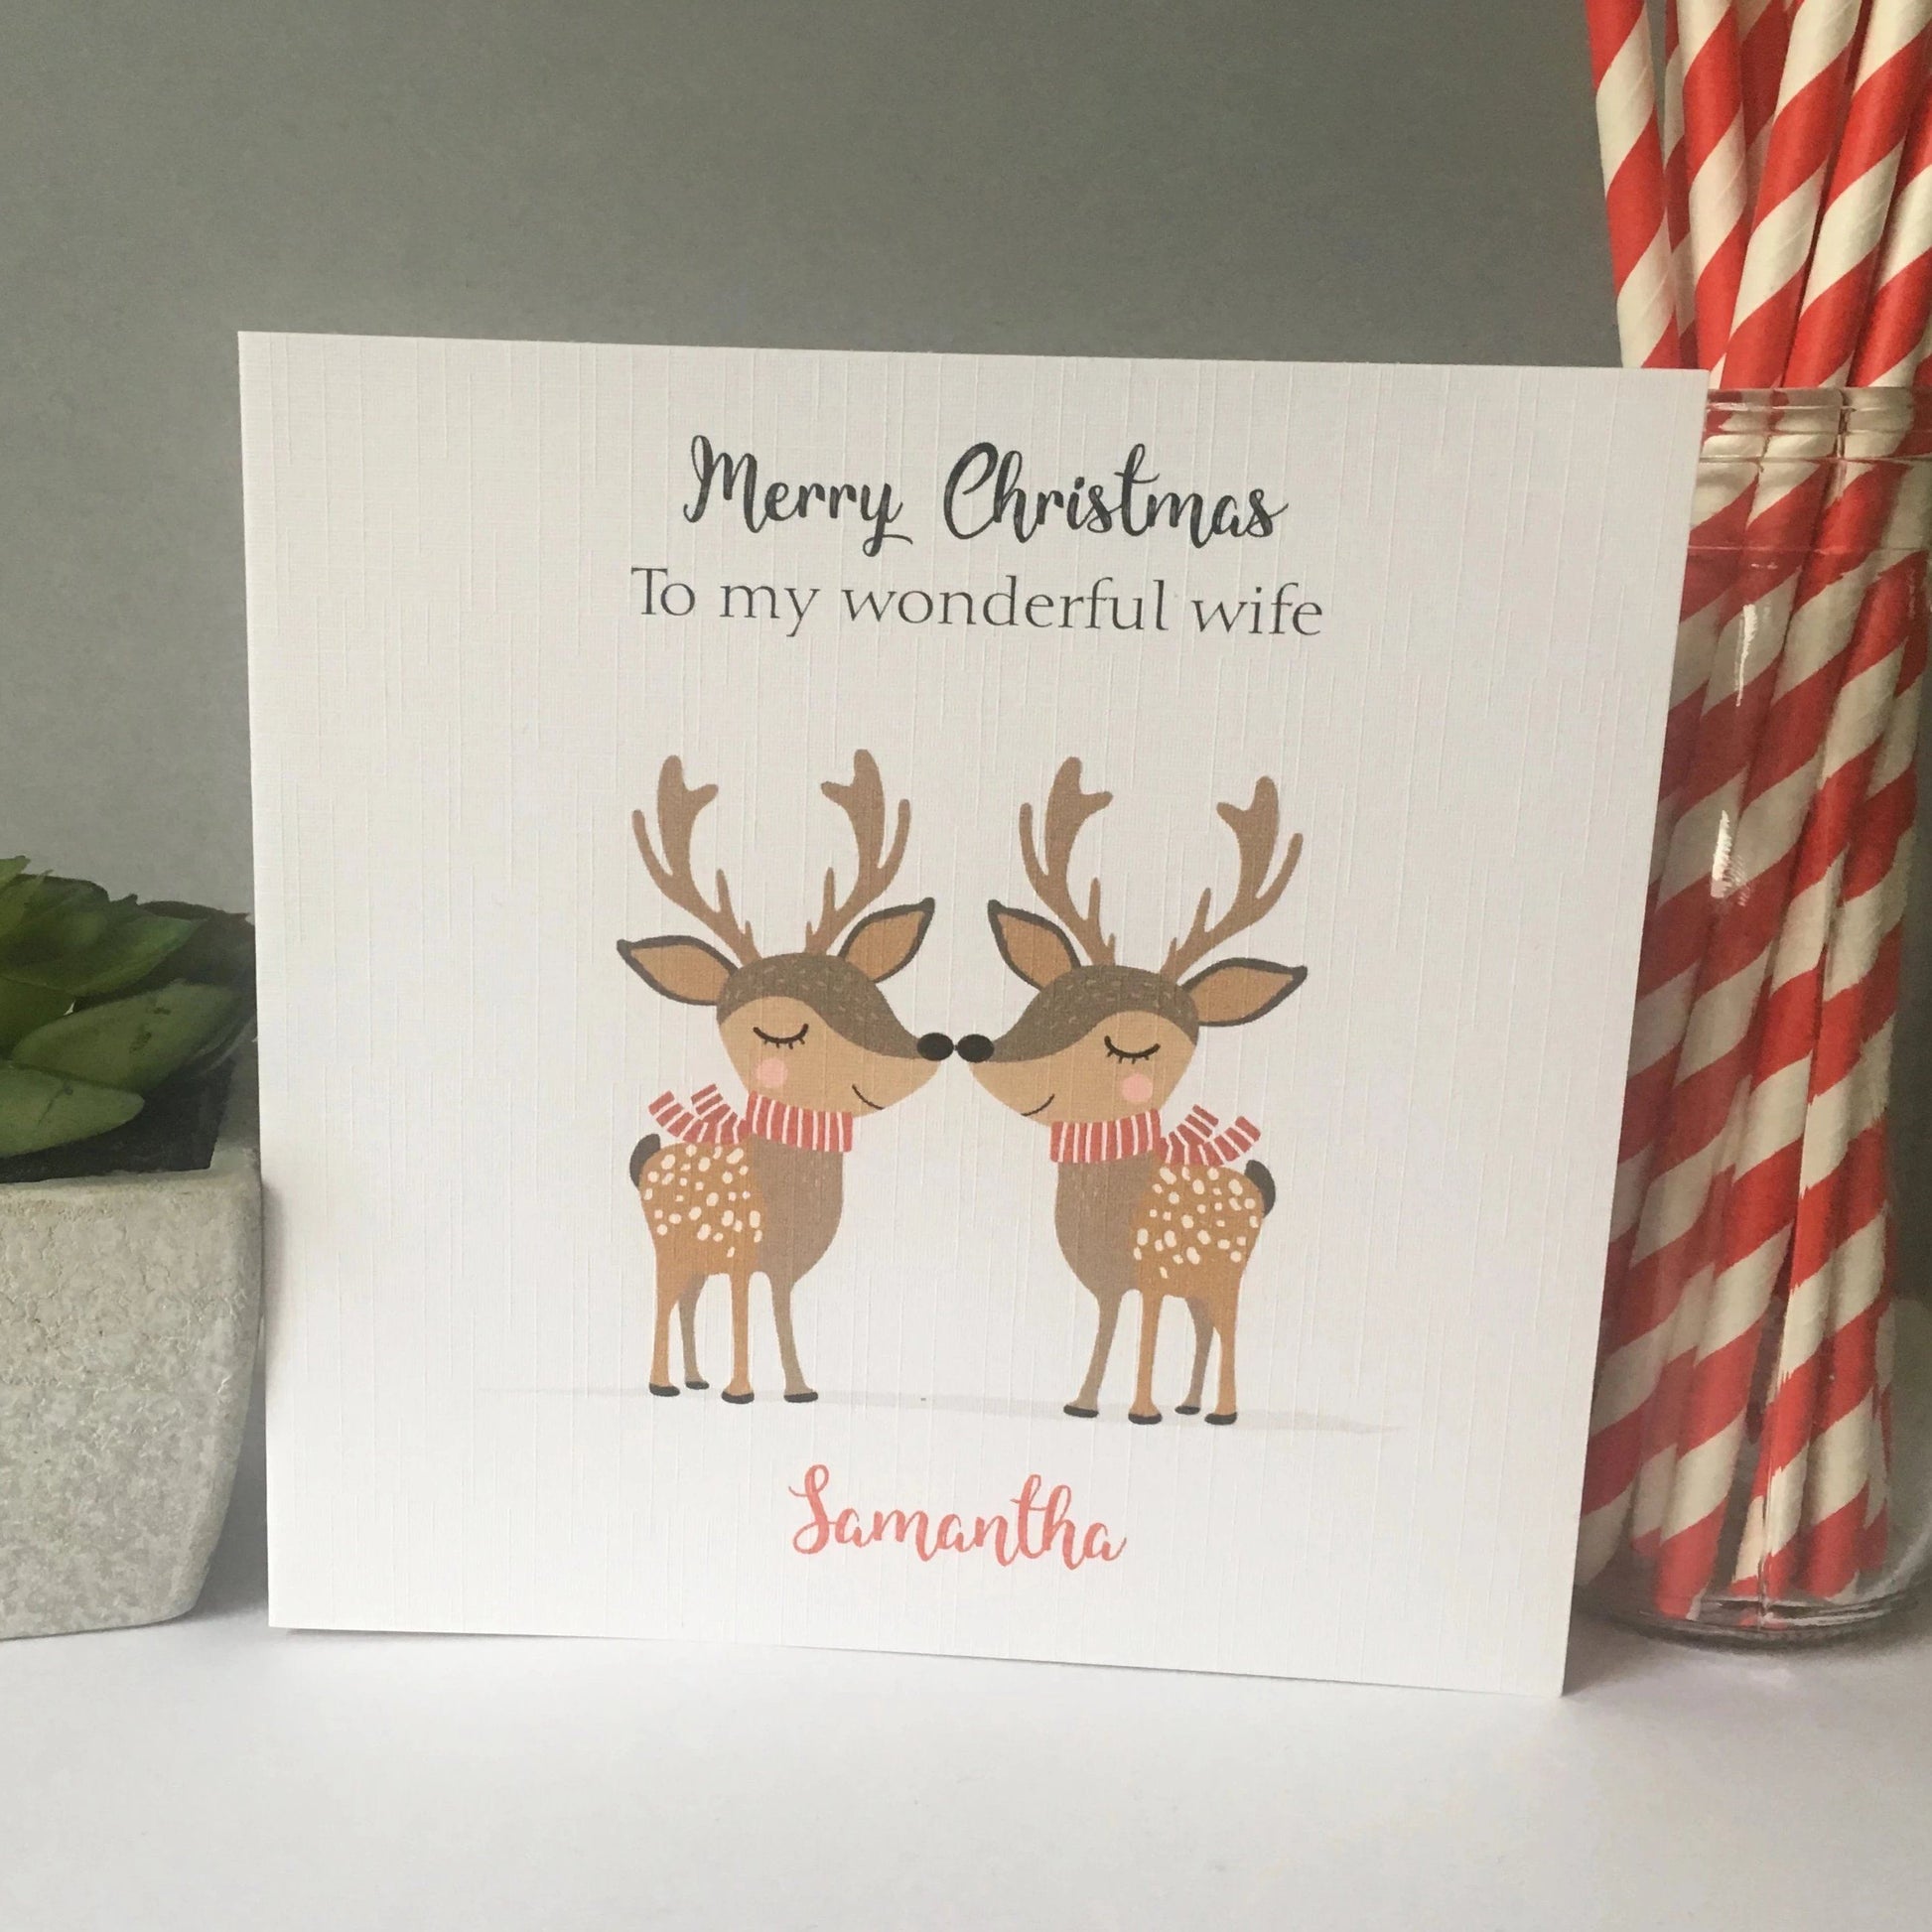 Personalised Christmas Card For Wife Husband Girlfriend Boyfriend Couple Brother in Law Sister in law 